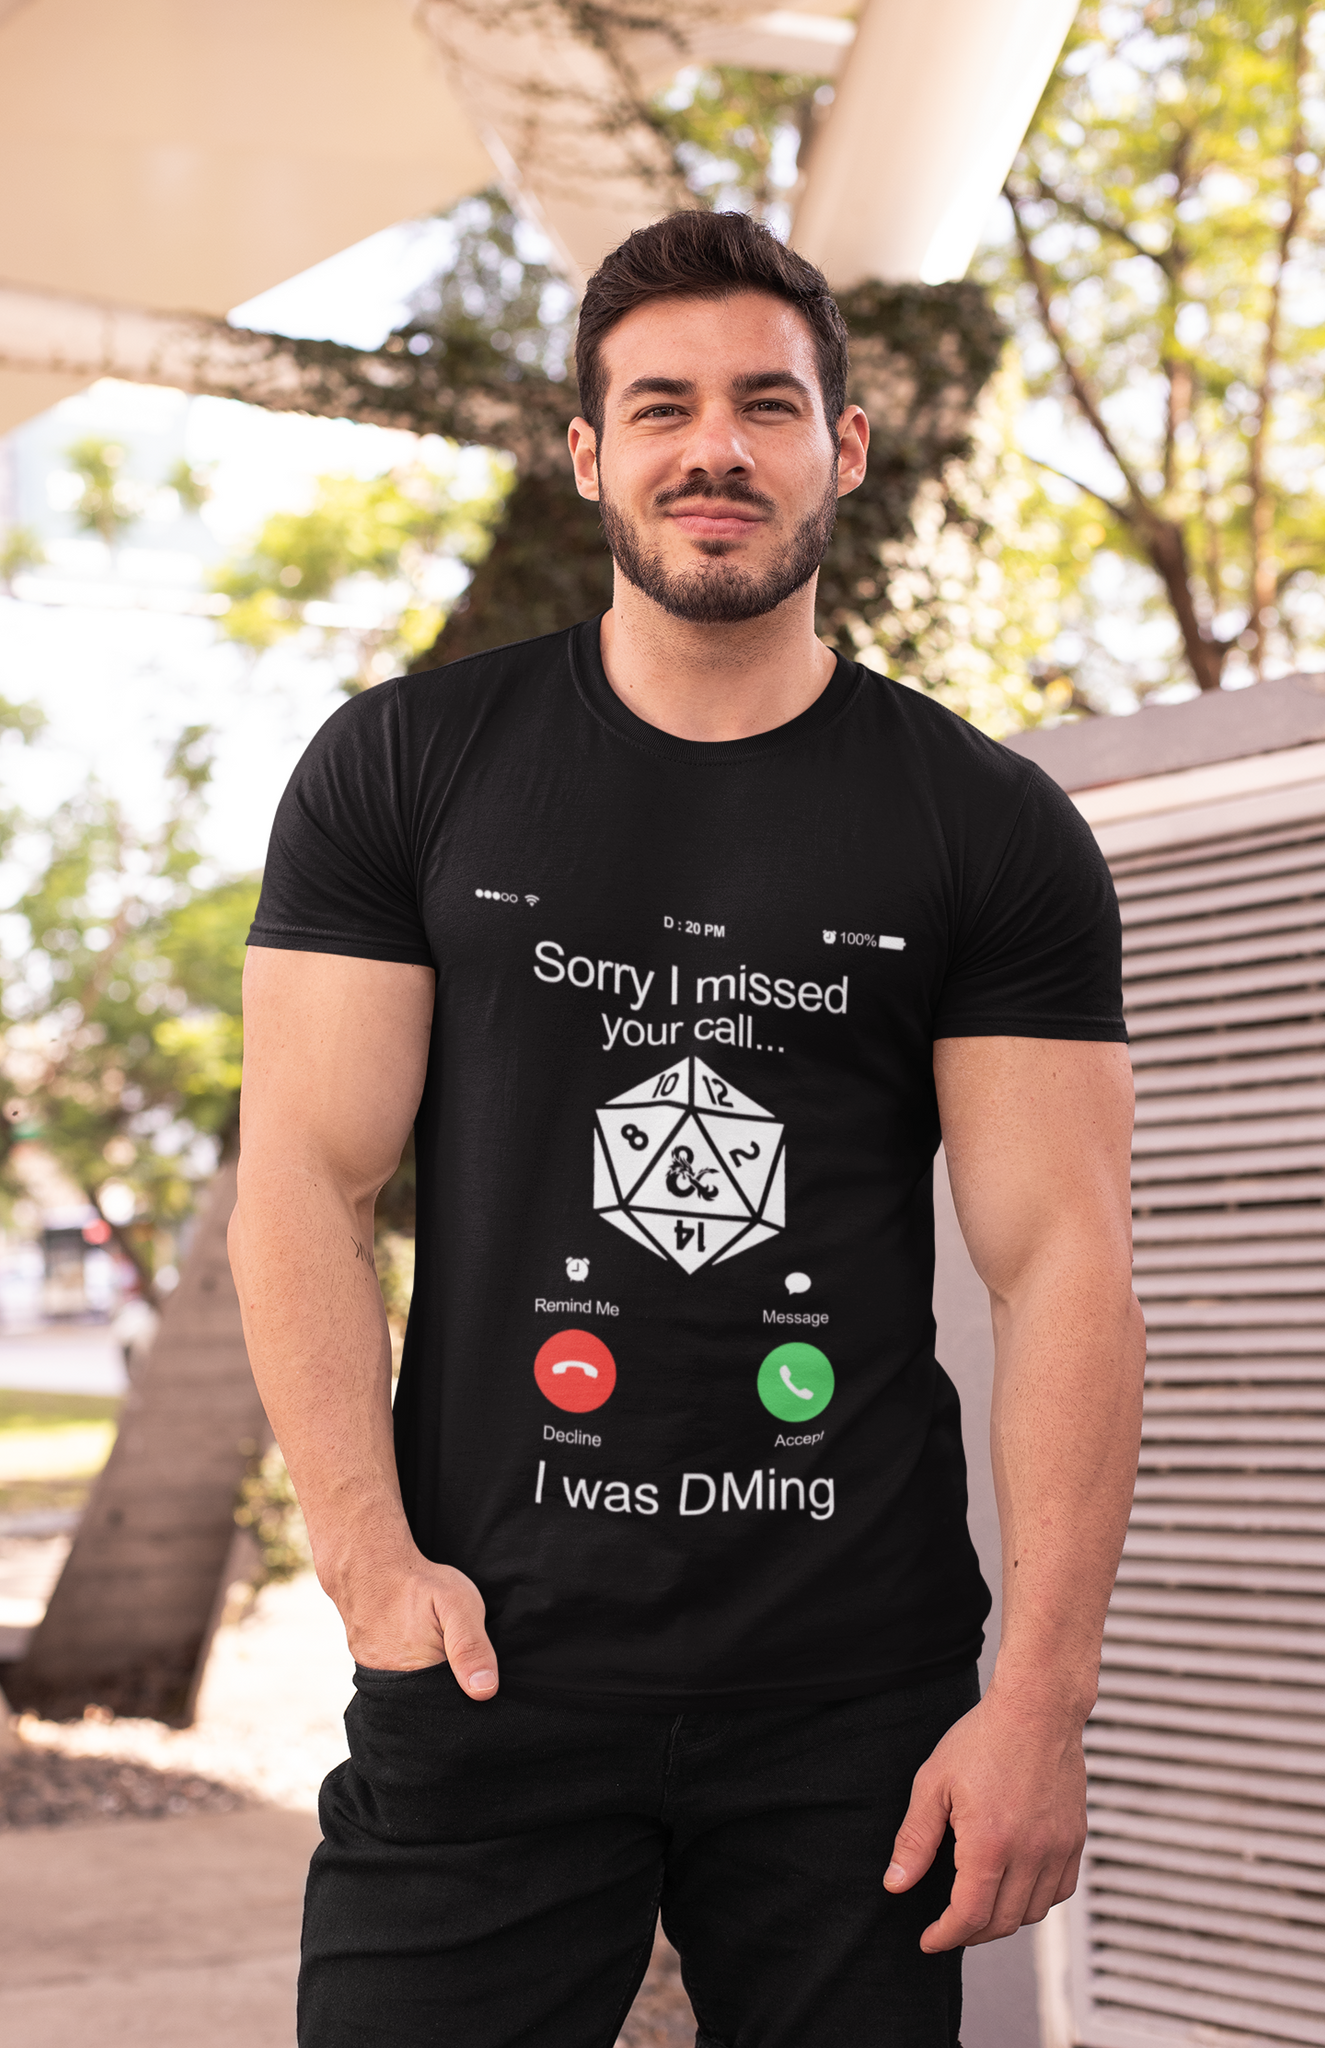 Dungeon And Dragon T Shirt, Sorry I Missed Your Call I Was Dming DND T Shirt, RPG Dice Games Tshirt